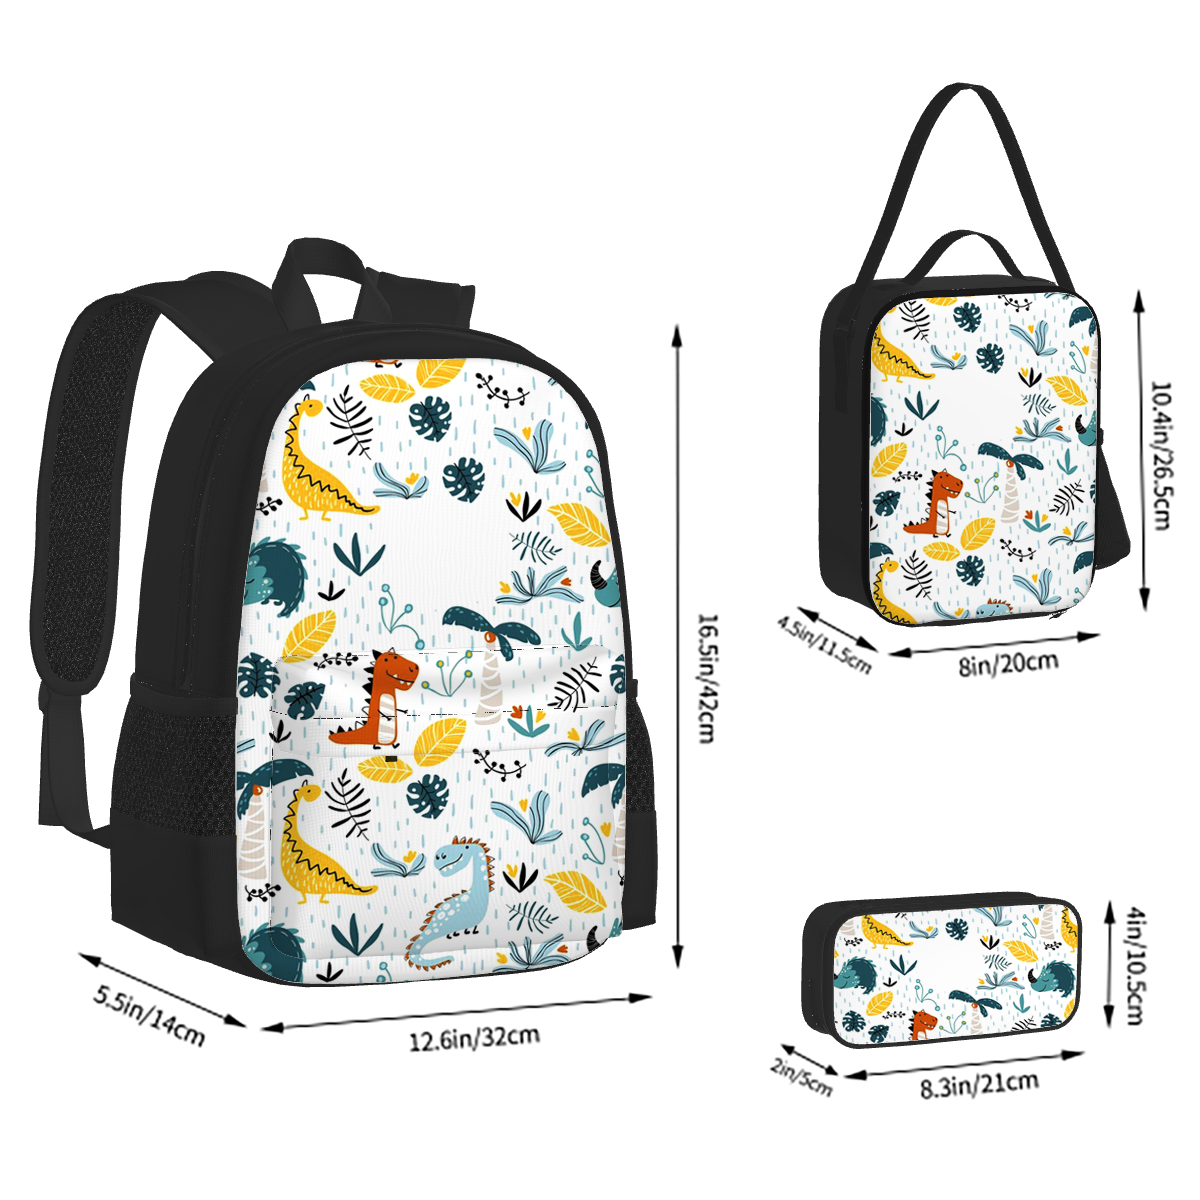 Laundry Customize Events Print on Demand Backpacks Personalized Design Lunch Bags